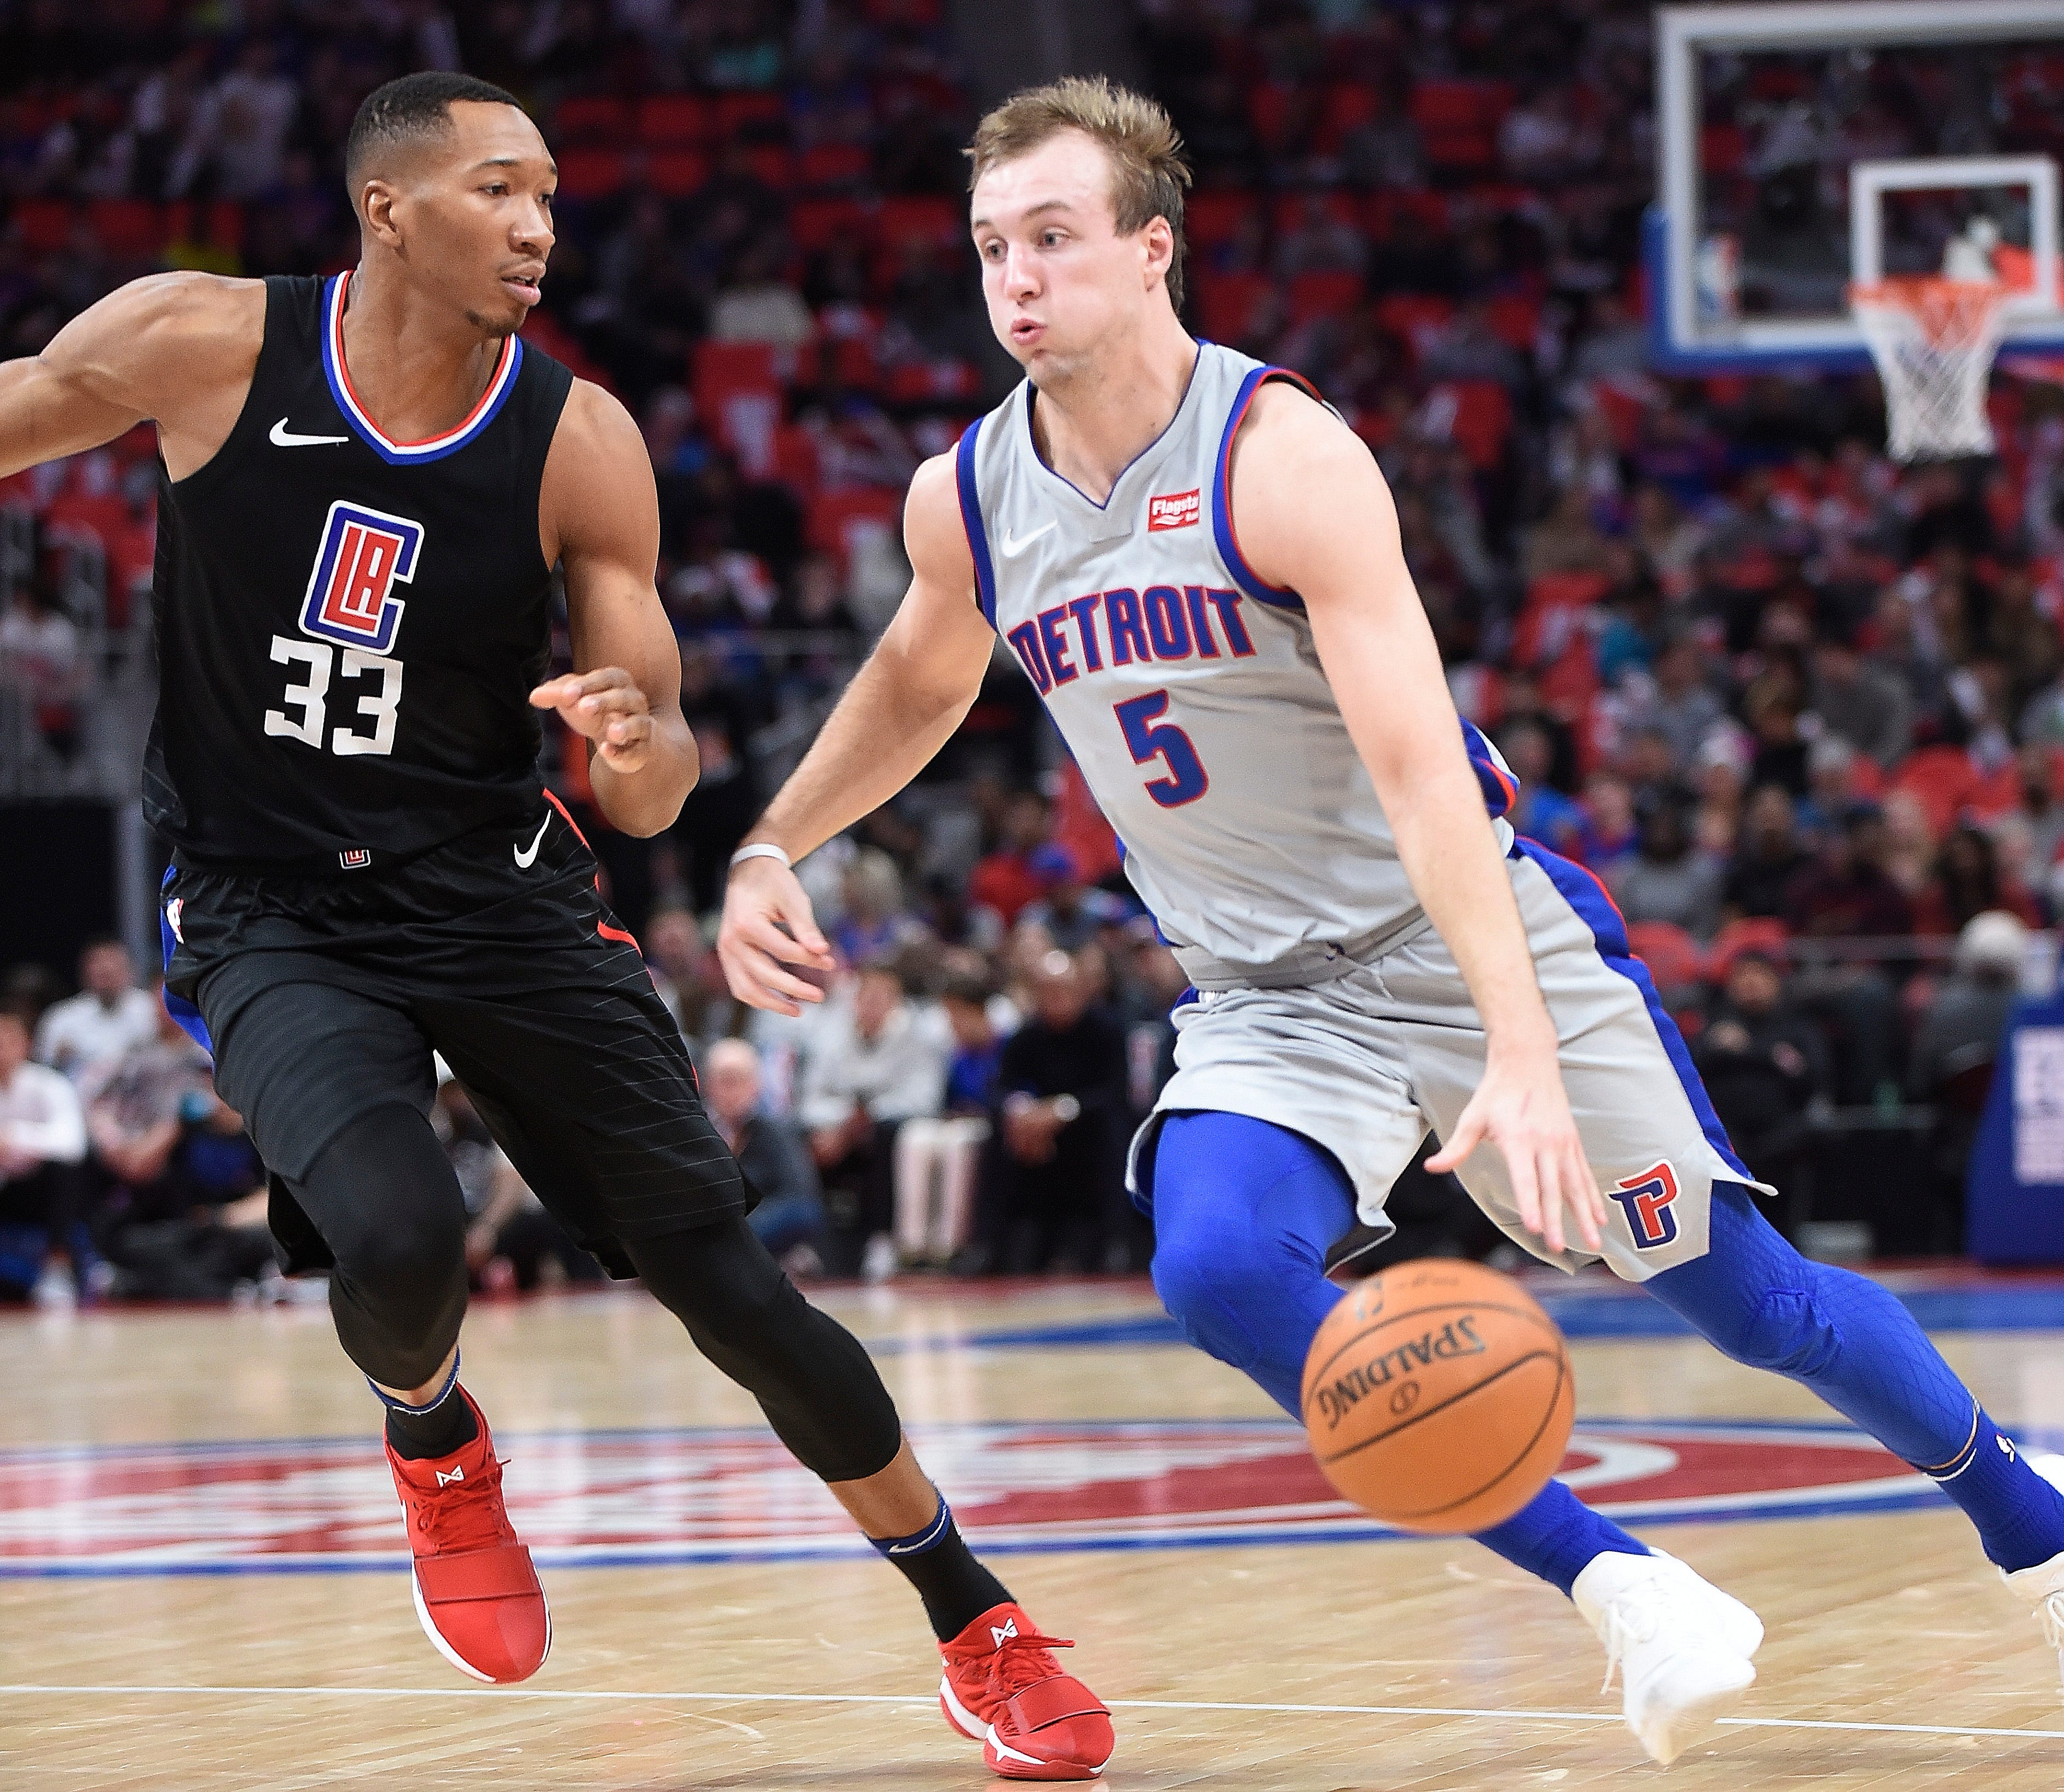 7. Luke Kennard, G: His value will increase as he gets more comfortable in the offense and improves on defense. With Reggie Bullock, there’s no need to rush Kennard along, but having either coming off the bench helps that group. He showed flashes last season as a rookie, but he’ll need to continue his development by becoming more of a facilitator. The Pistons will even try to put him in more situations to handle the ball and facilitate.